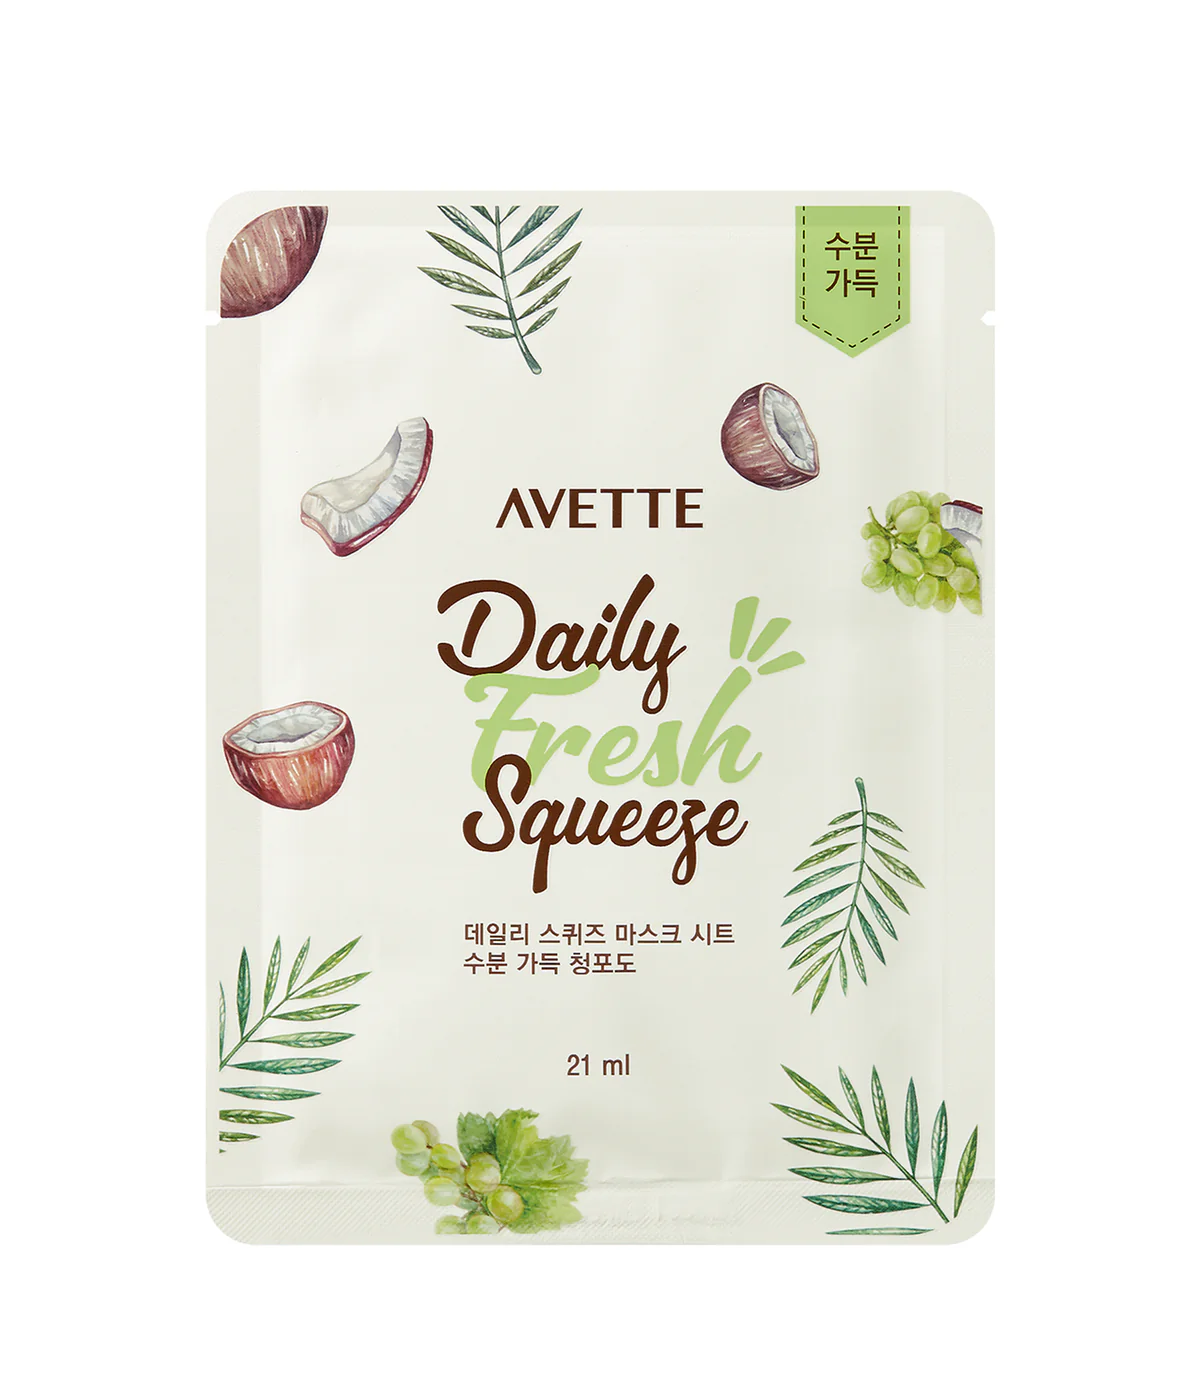 Avette daily fresh squeeze sheet mask facial